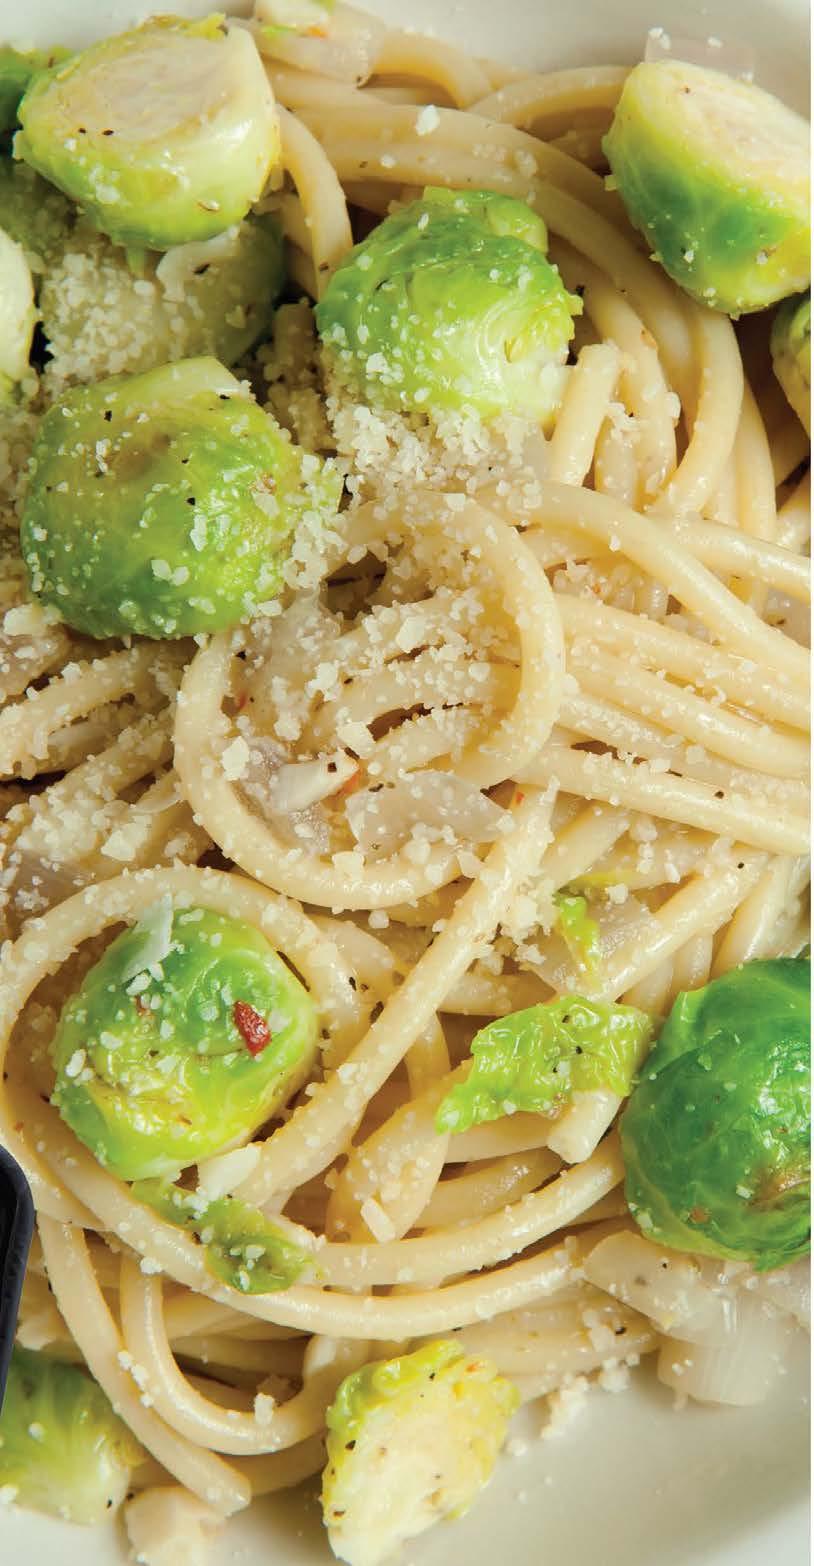 olive oil ½ pound bucatini ¼ cup bread crumbs ½ cup freshly grated parmesan ¼ cup low sodium chicken broth DIRECTIONS: Cook pasta according to